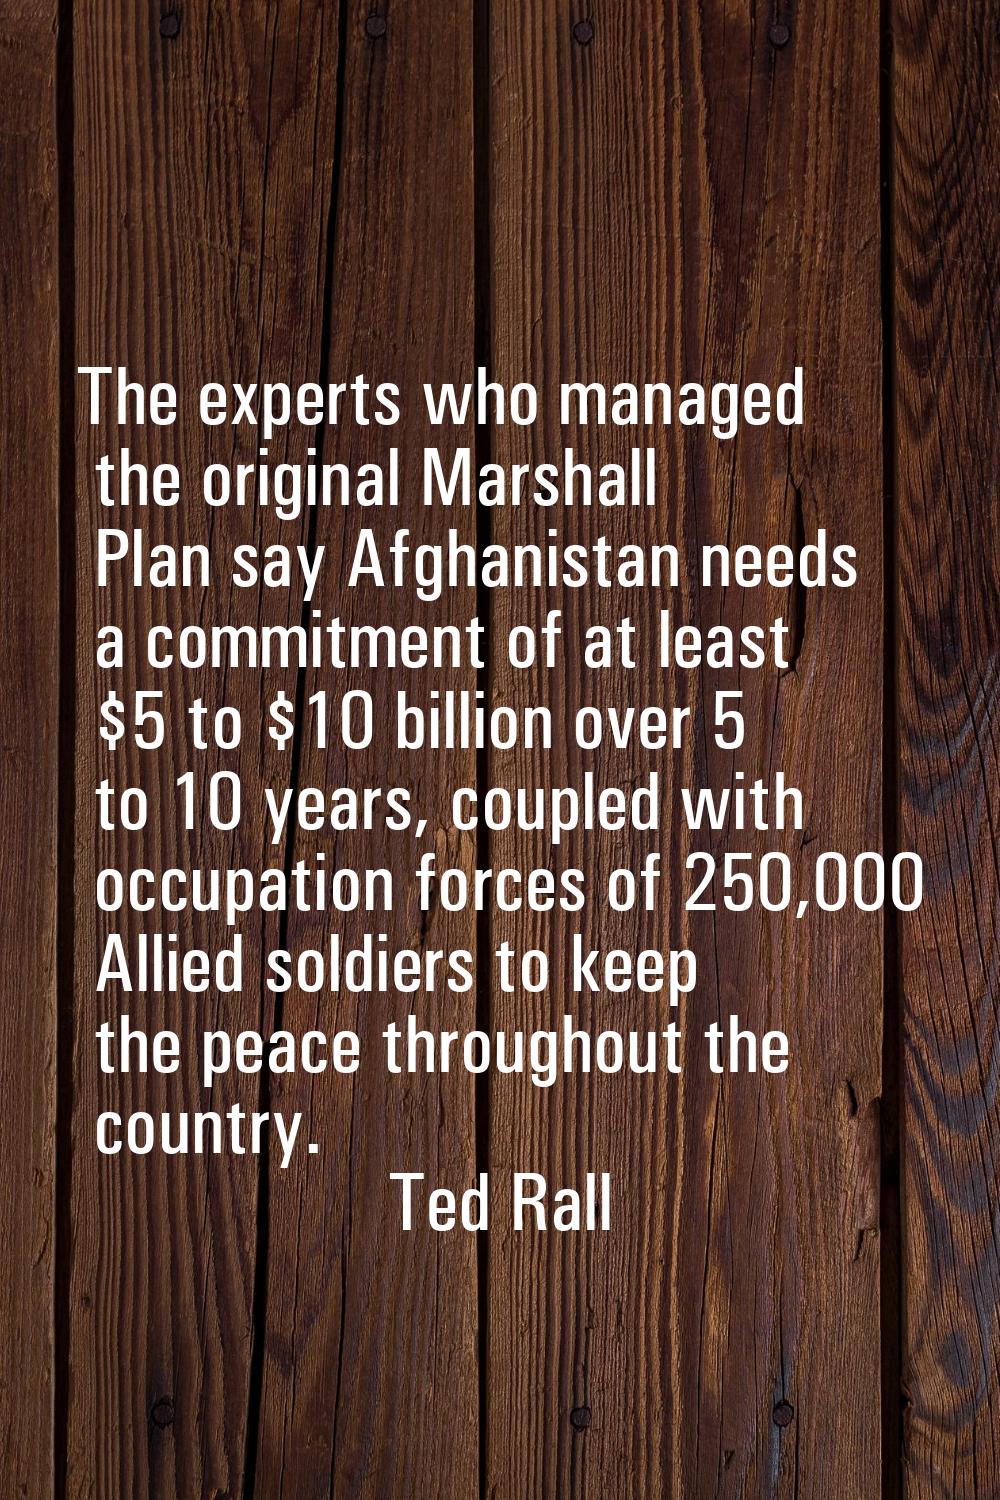 The experts who managed the original Marshall Plan say Afghanistan needs a commitment of at least $